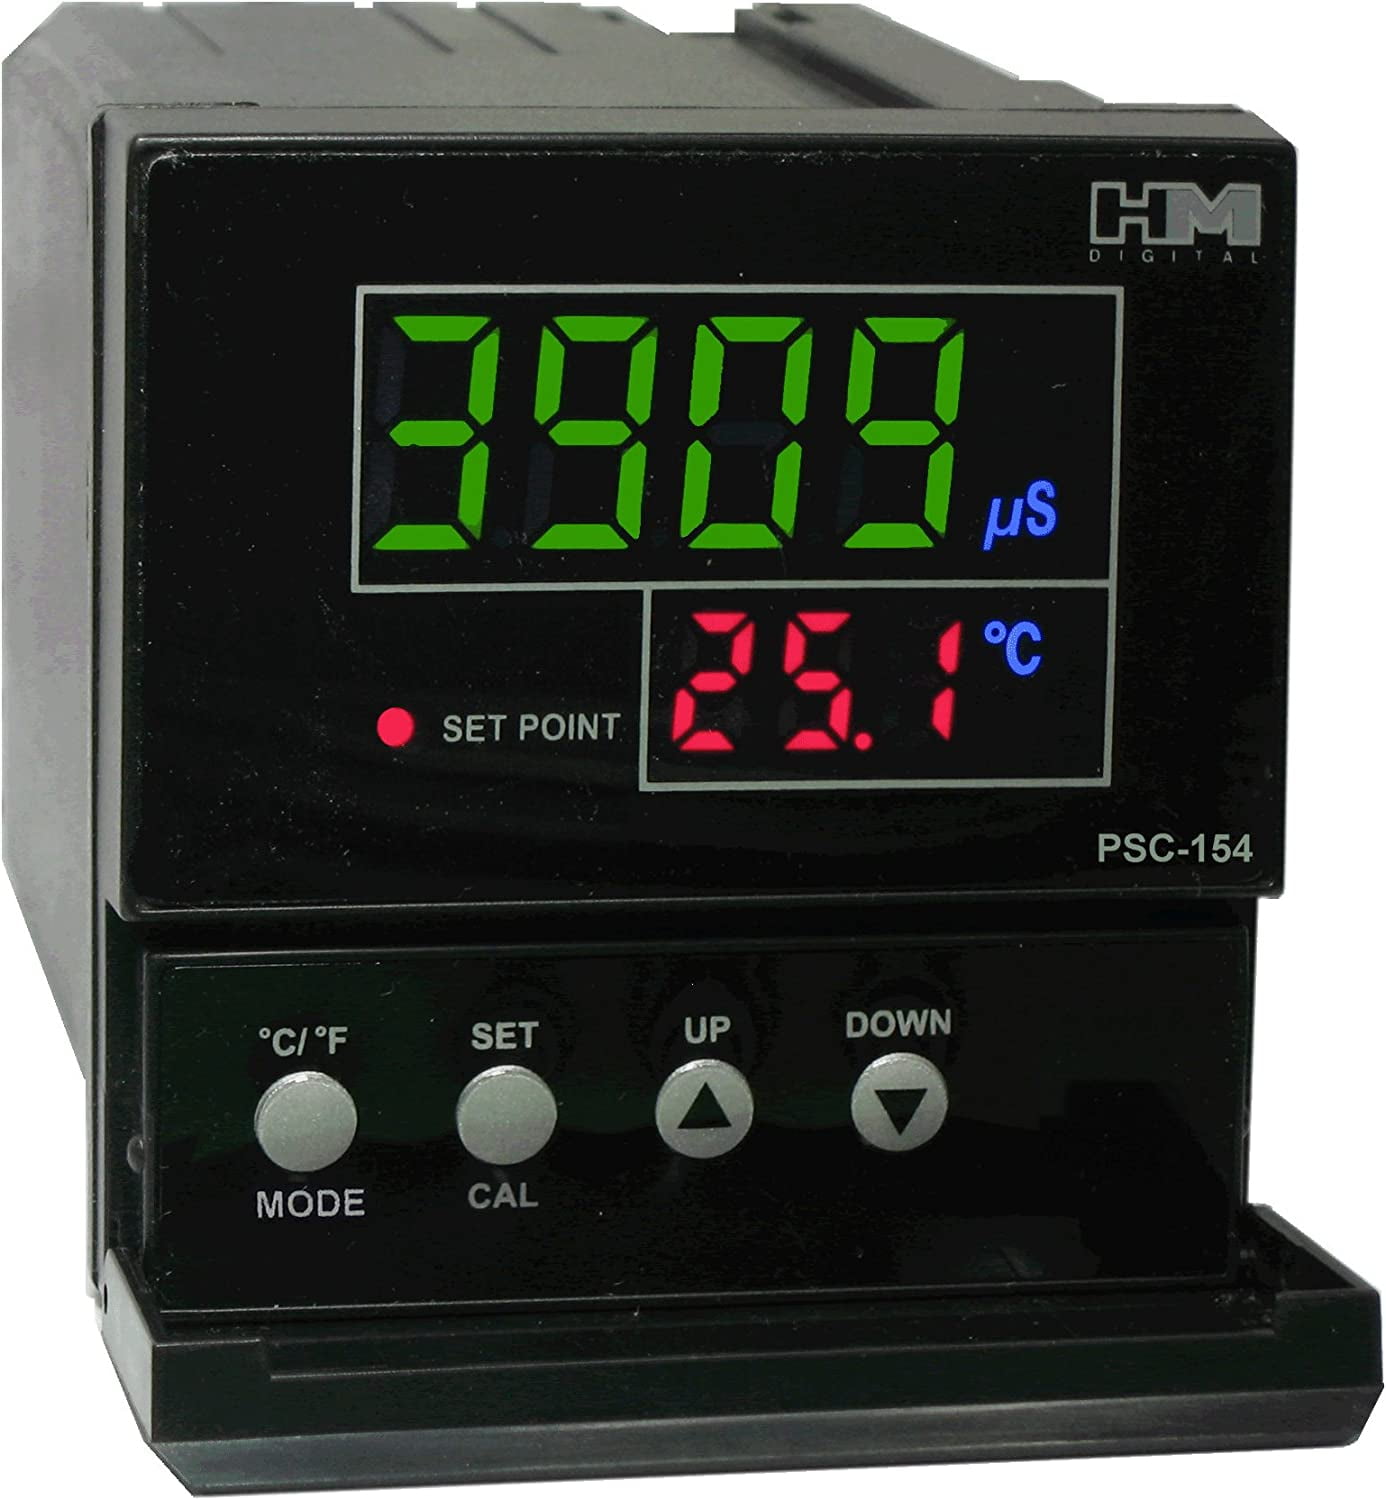 HM Digital PSC-154 TDS/EC Controller with 4-20mA Output, 0-9999 µS  Measurement Range, 0.1 µS/ppm Resolution, +/-2% Readout Accuracy 